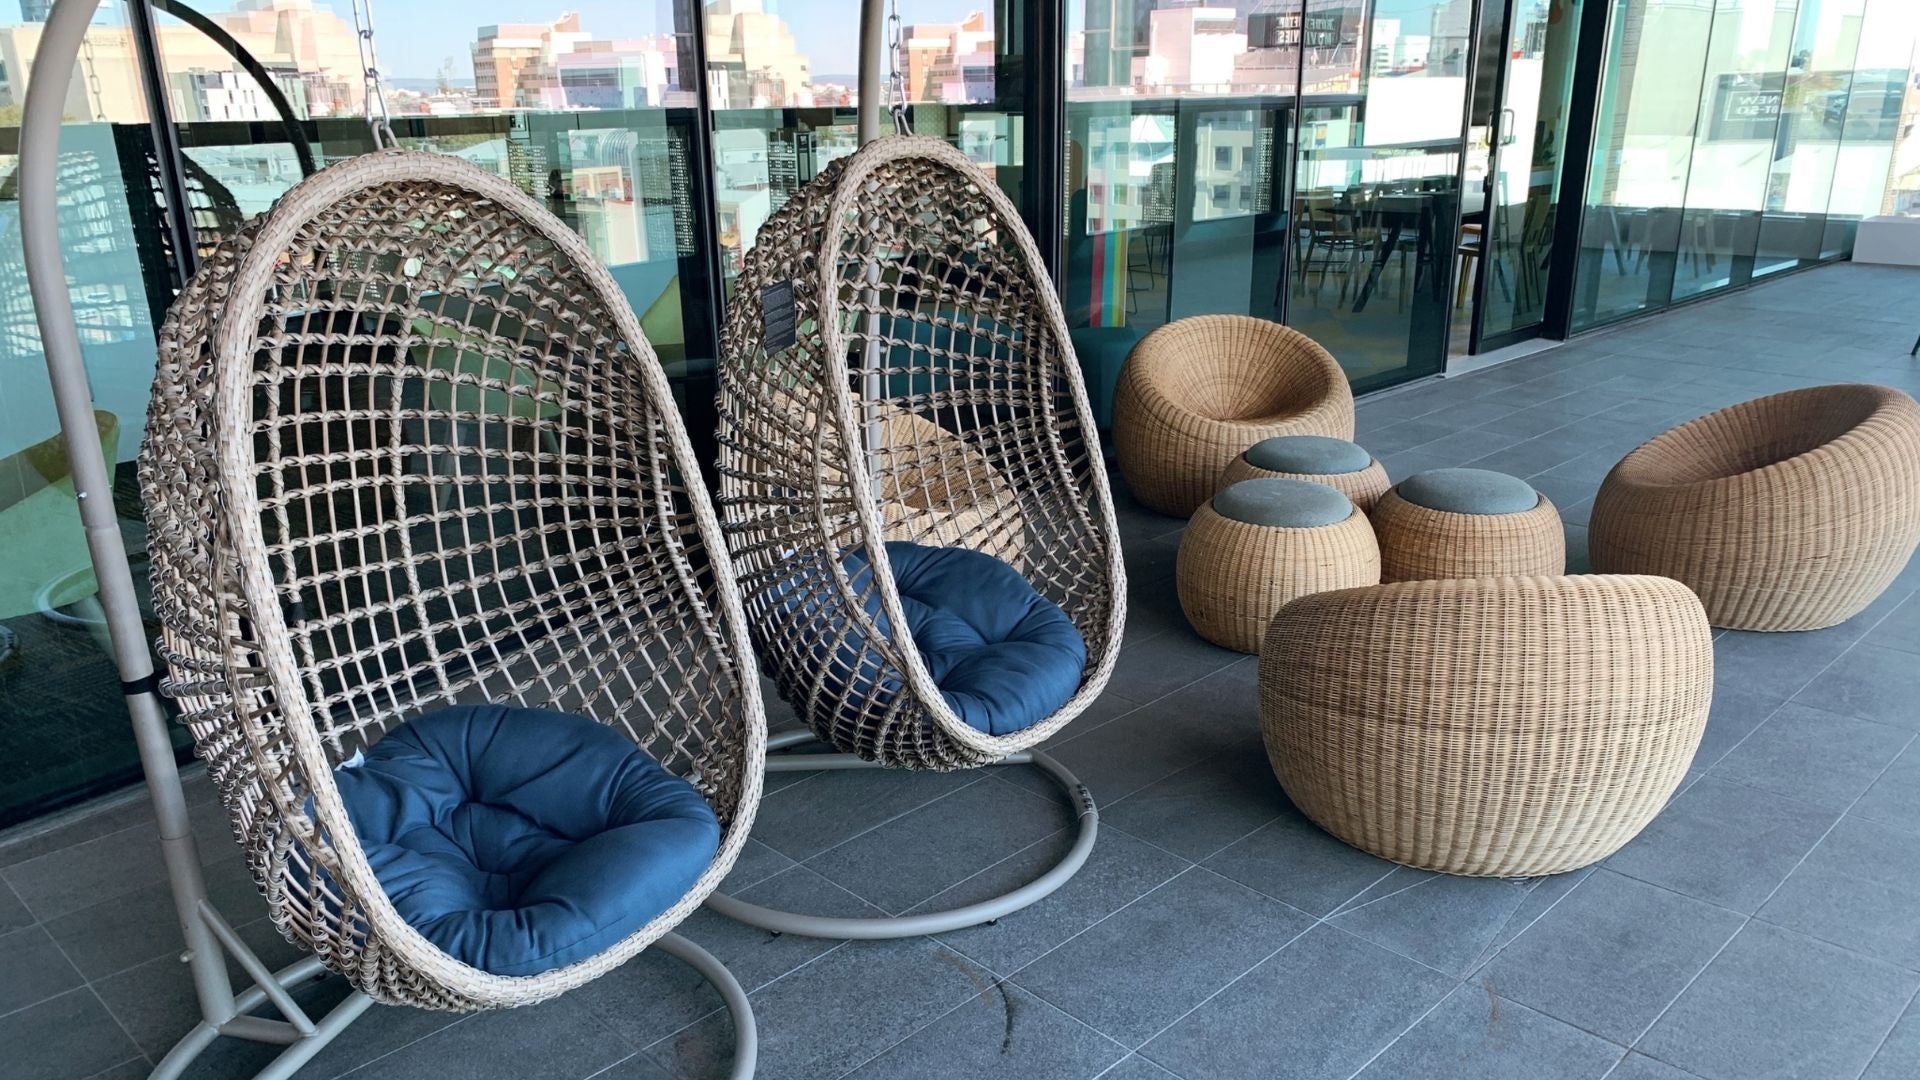 Hanging egg chairs